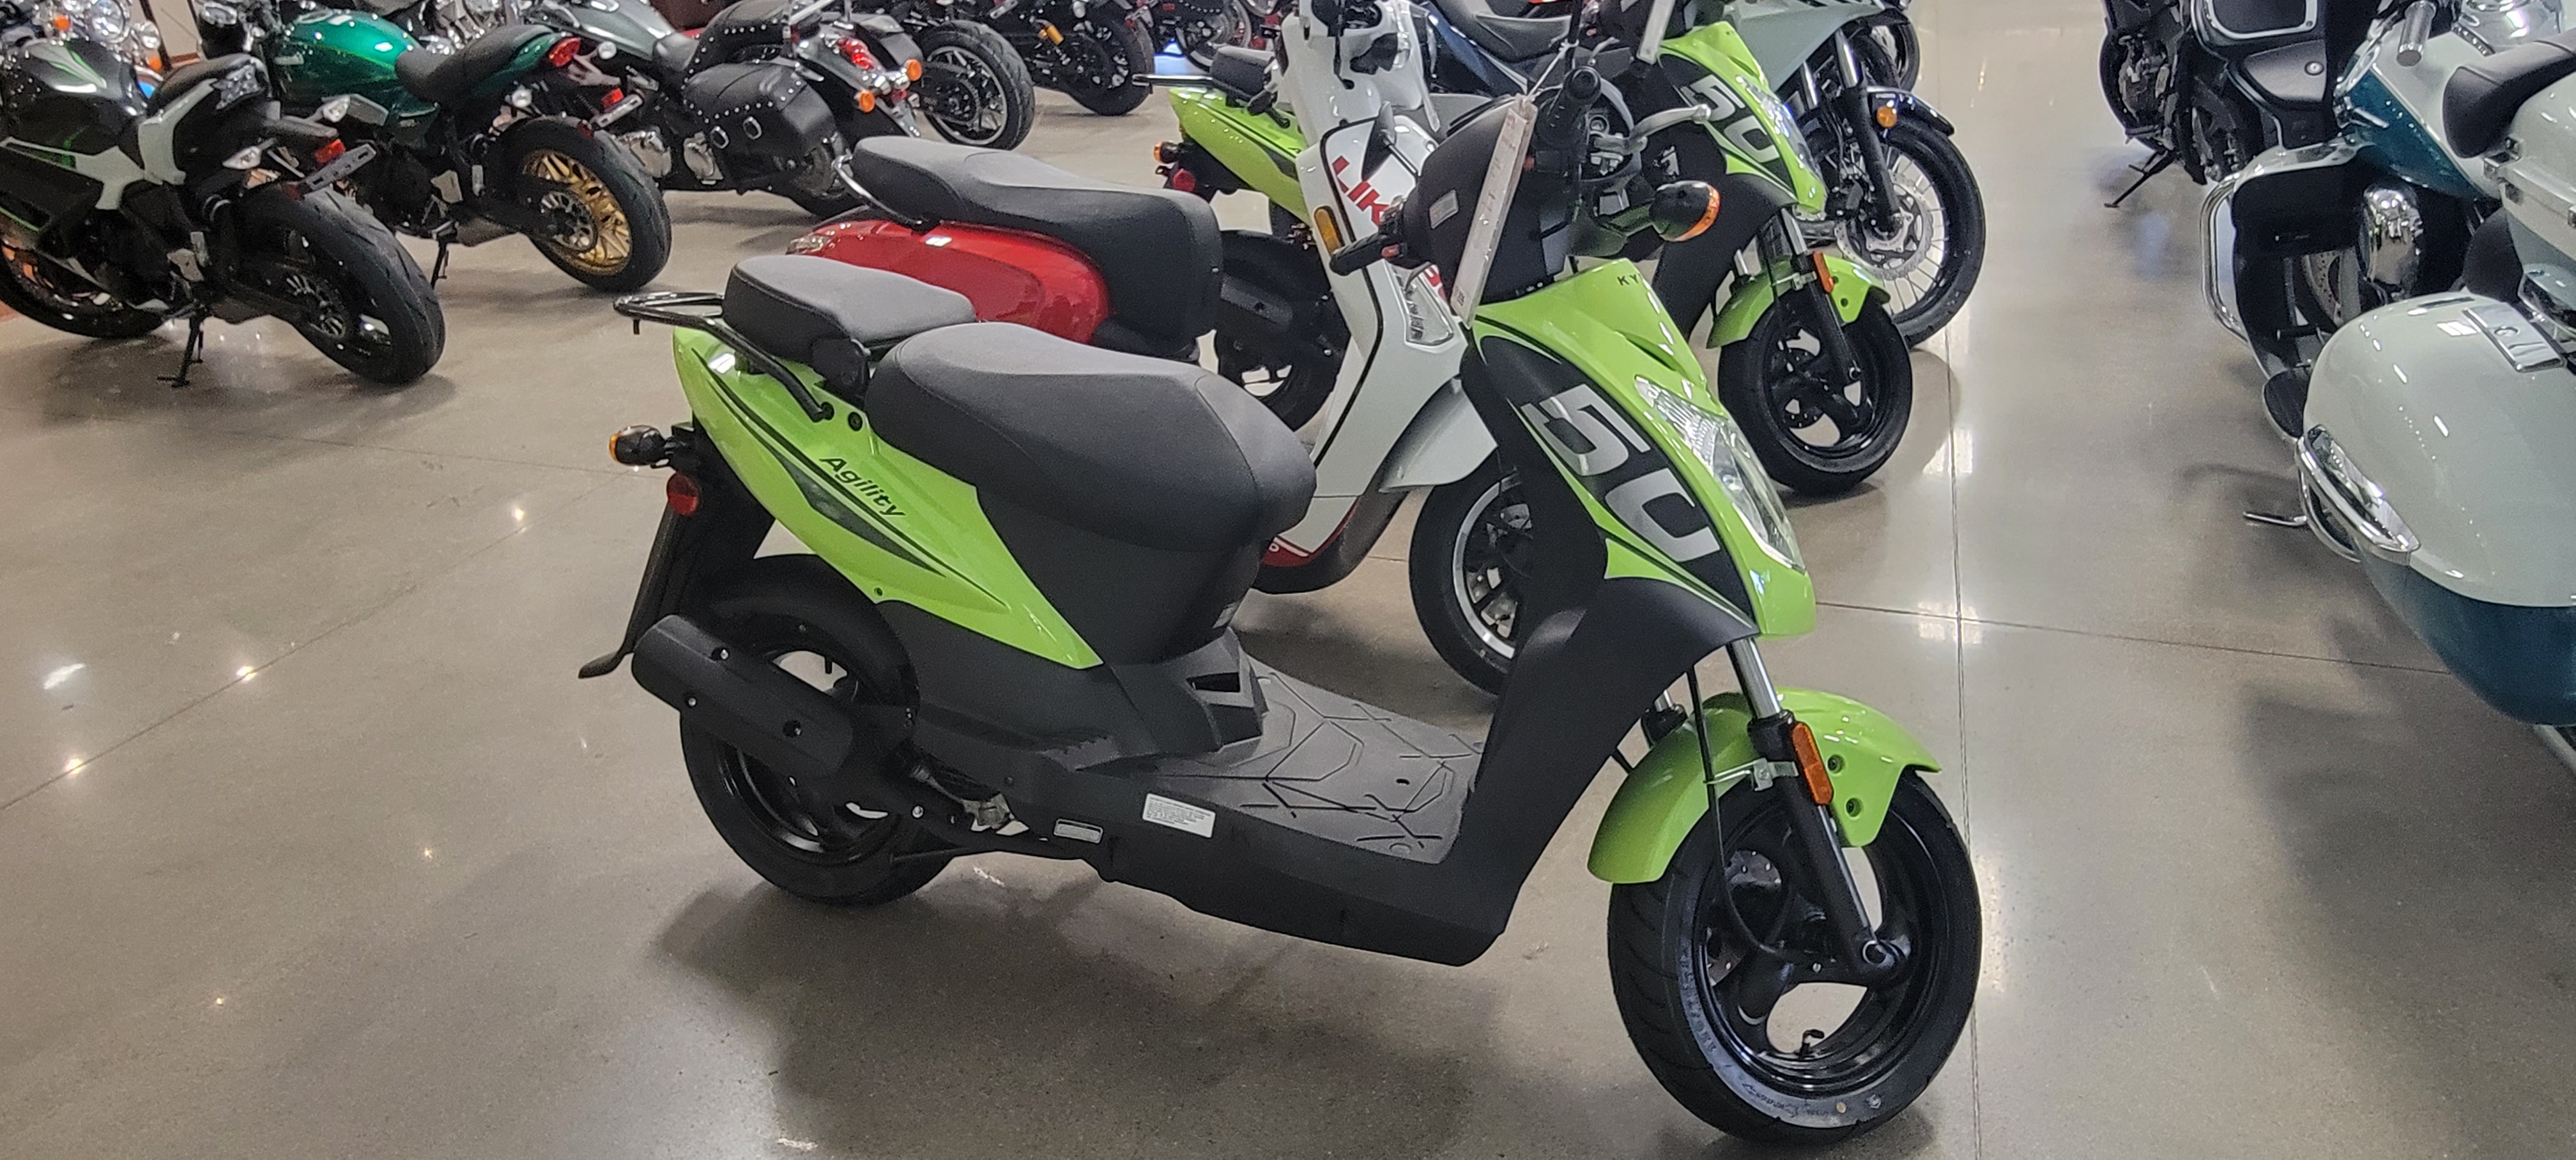 2022 KYMCO Agility 50 at Brenny's Motorcycle Clinic, Bettendorf, IA 52722